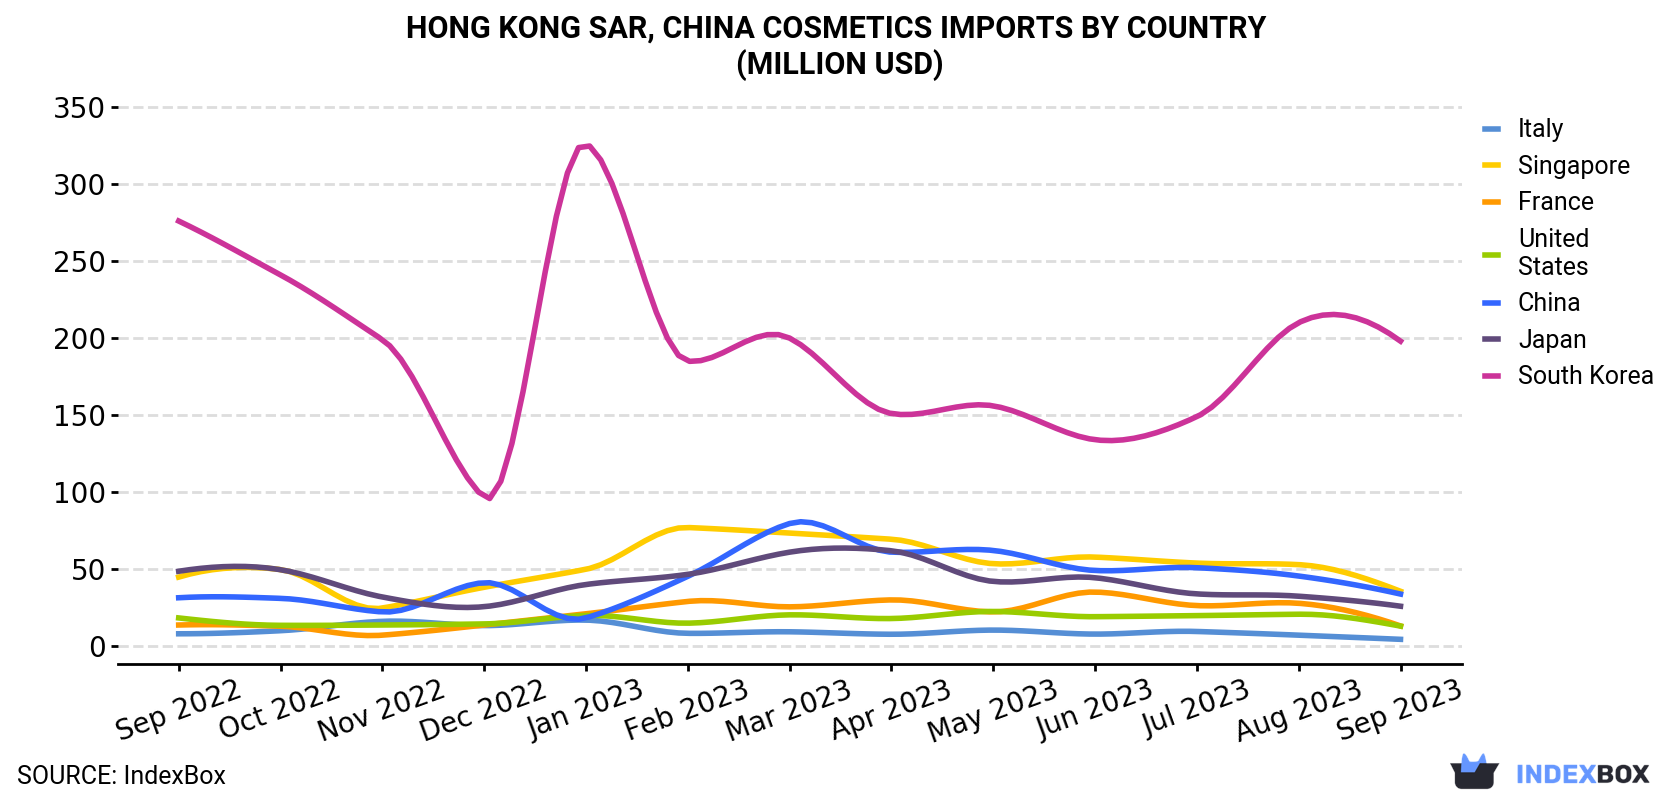 Hong Kong Cosmetics Imports By Country (Million USD)